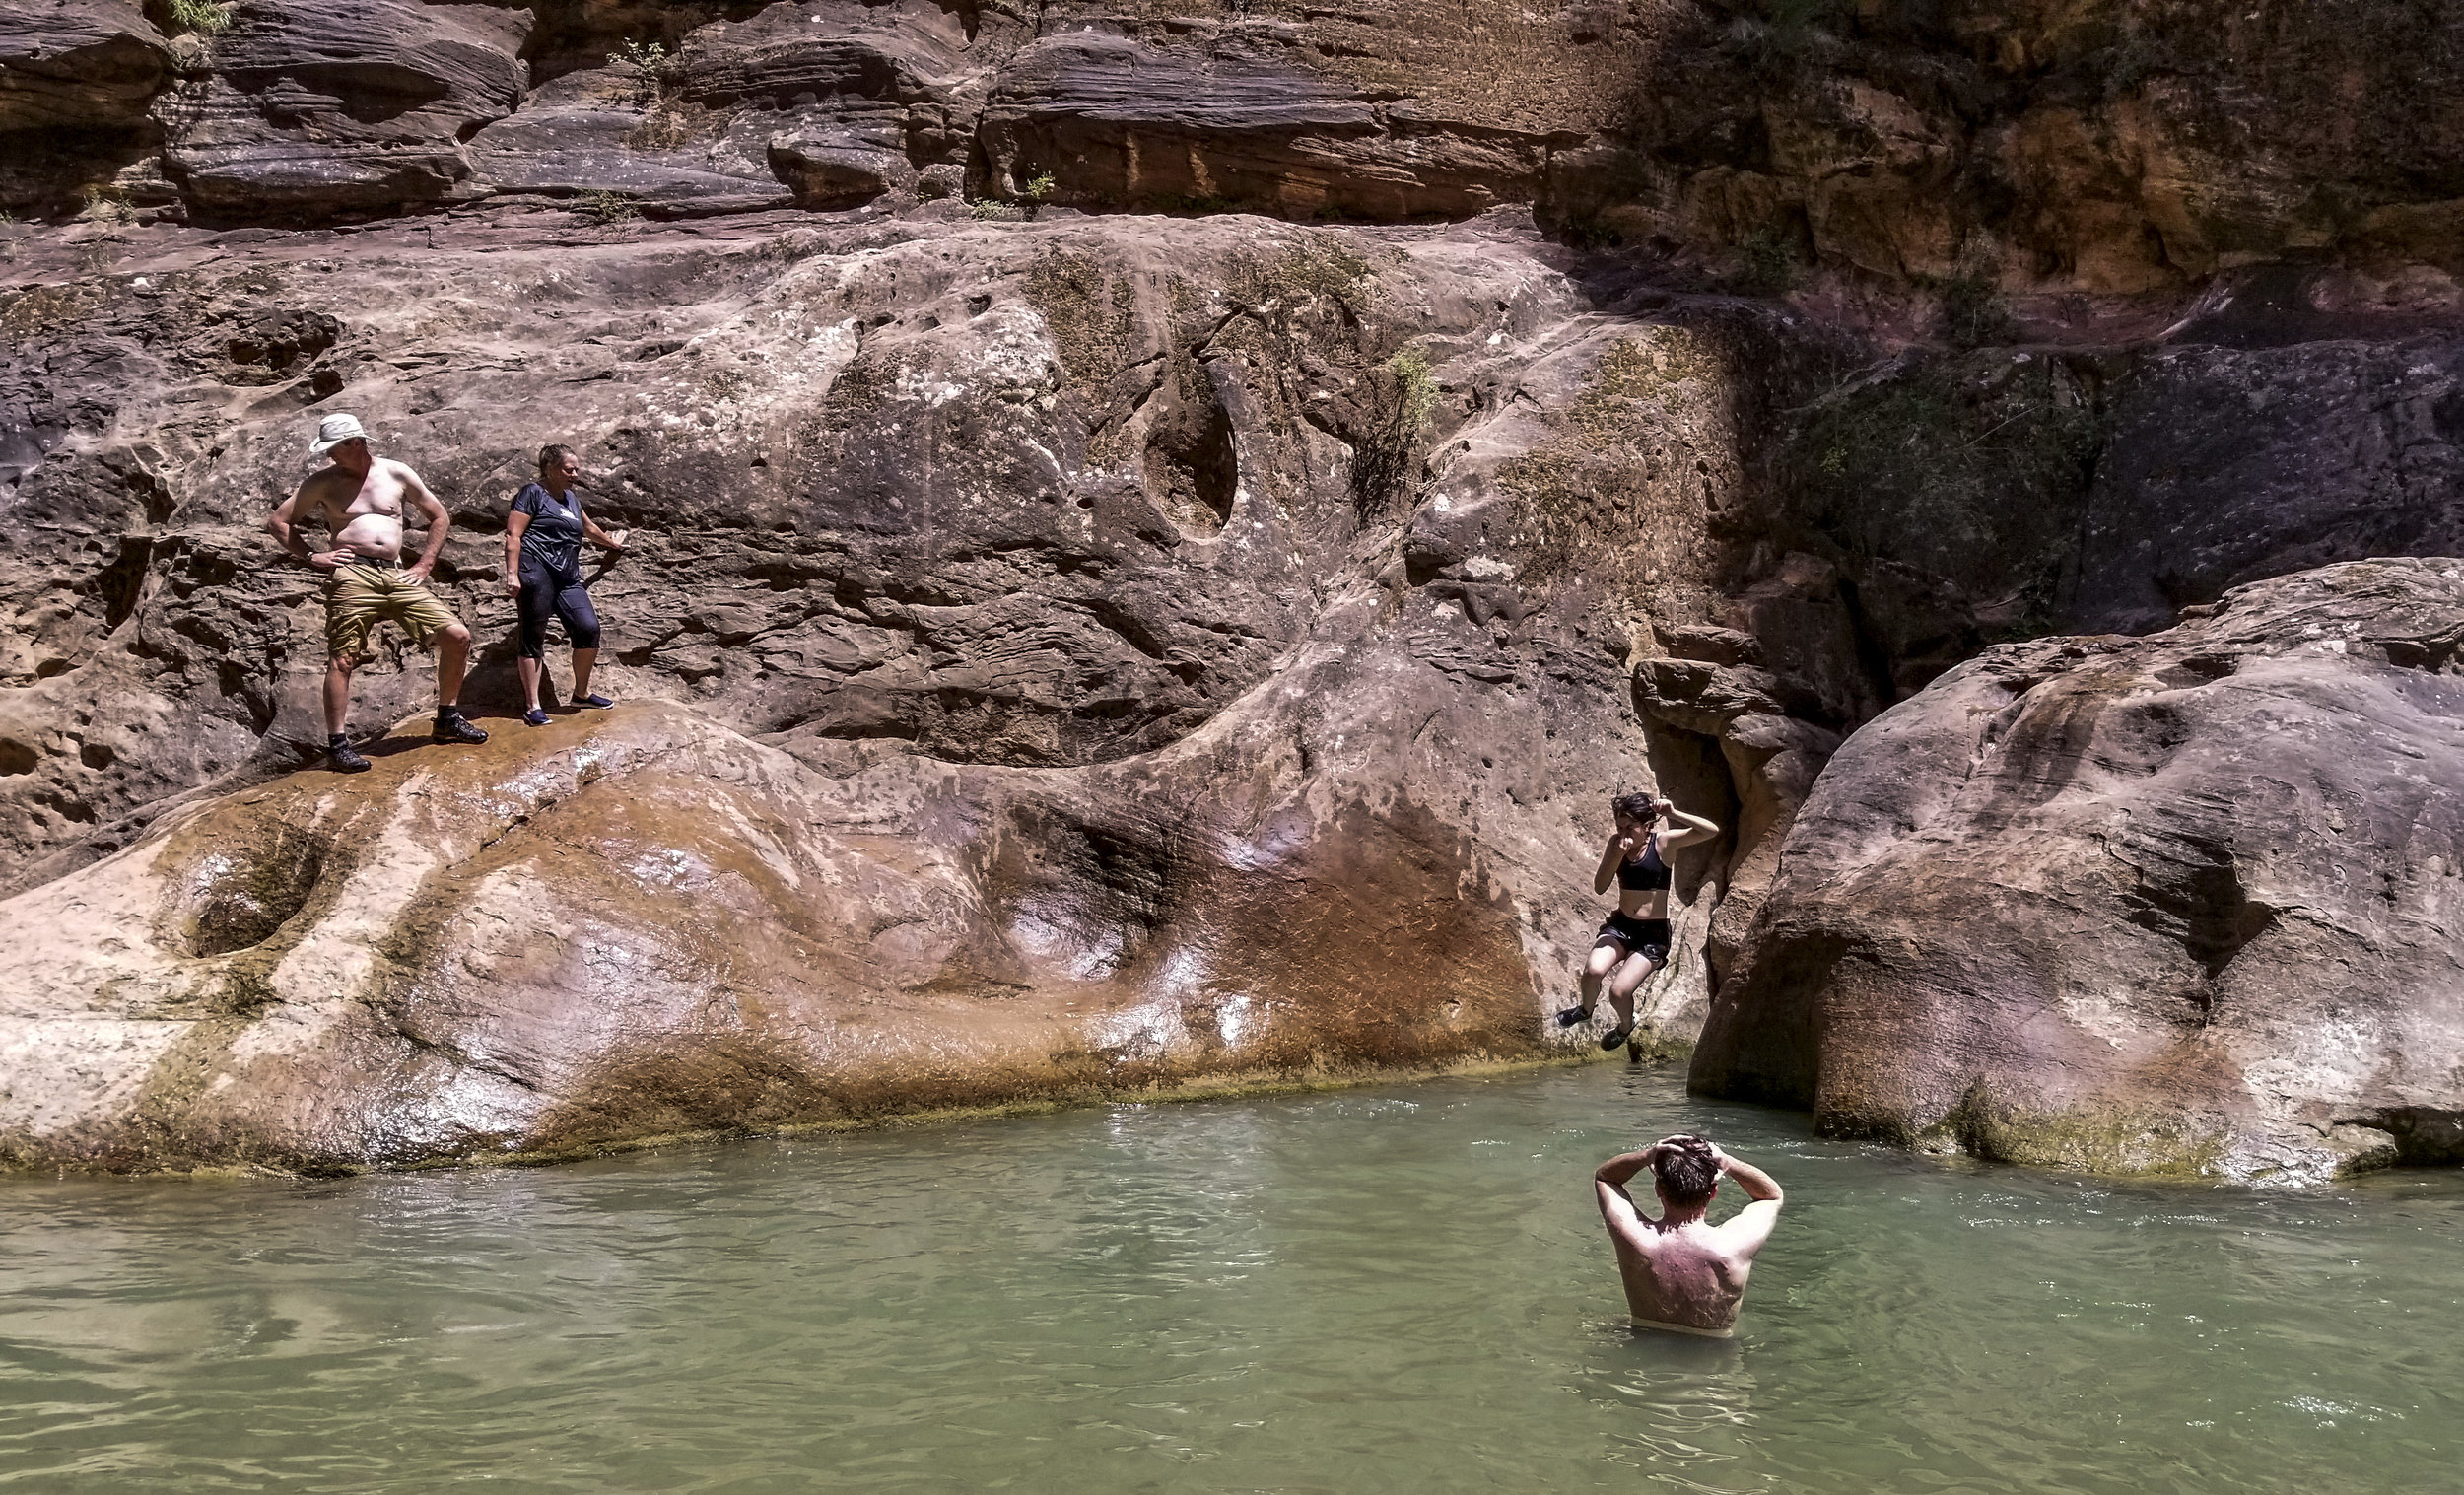  Zion National Park visitors jump off rocks along The Narrows, a river hike through the Virgin River, at Zion National Park in Utah on Friday, July 14, 2017.  Patrick Connolly Las Vegas Review-Journal @PConnPie 